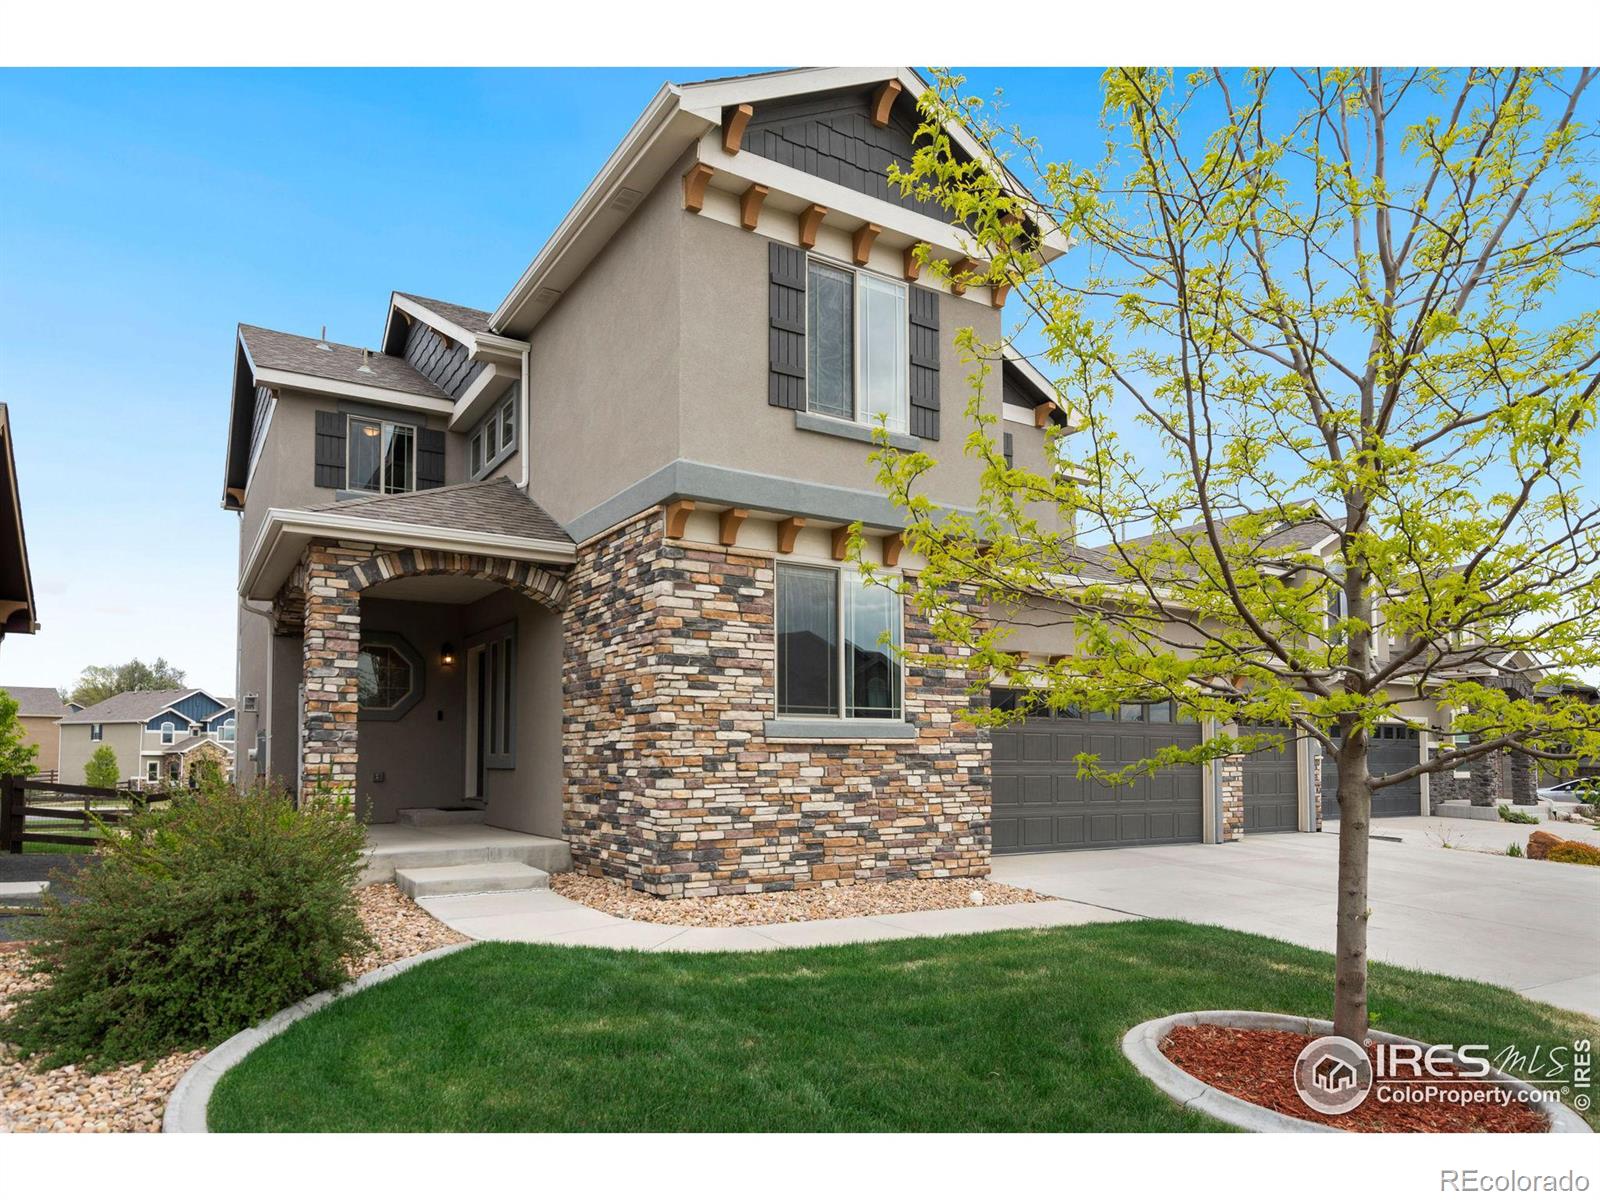 Report Image for 4373  Chicory Court,Johnstown, Colorado